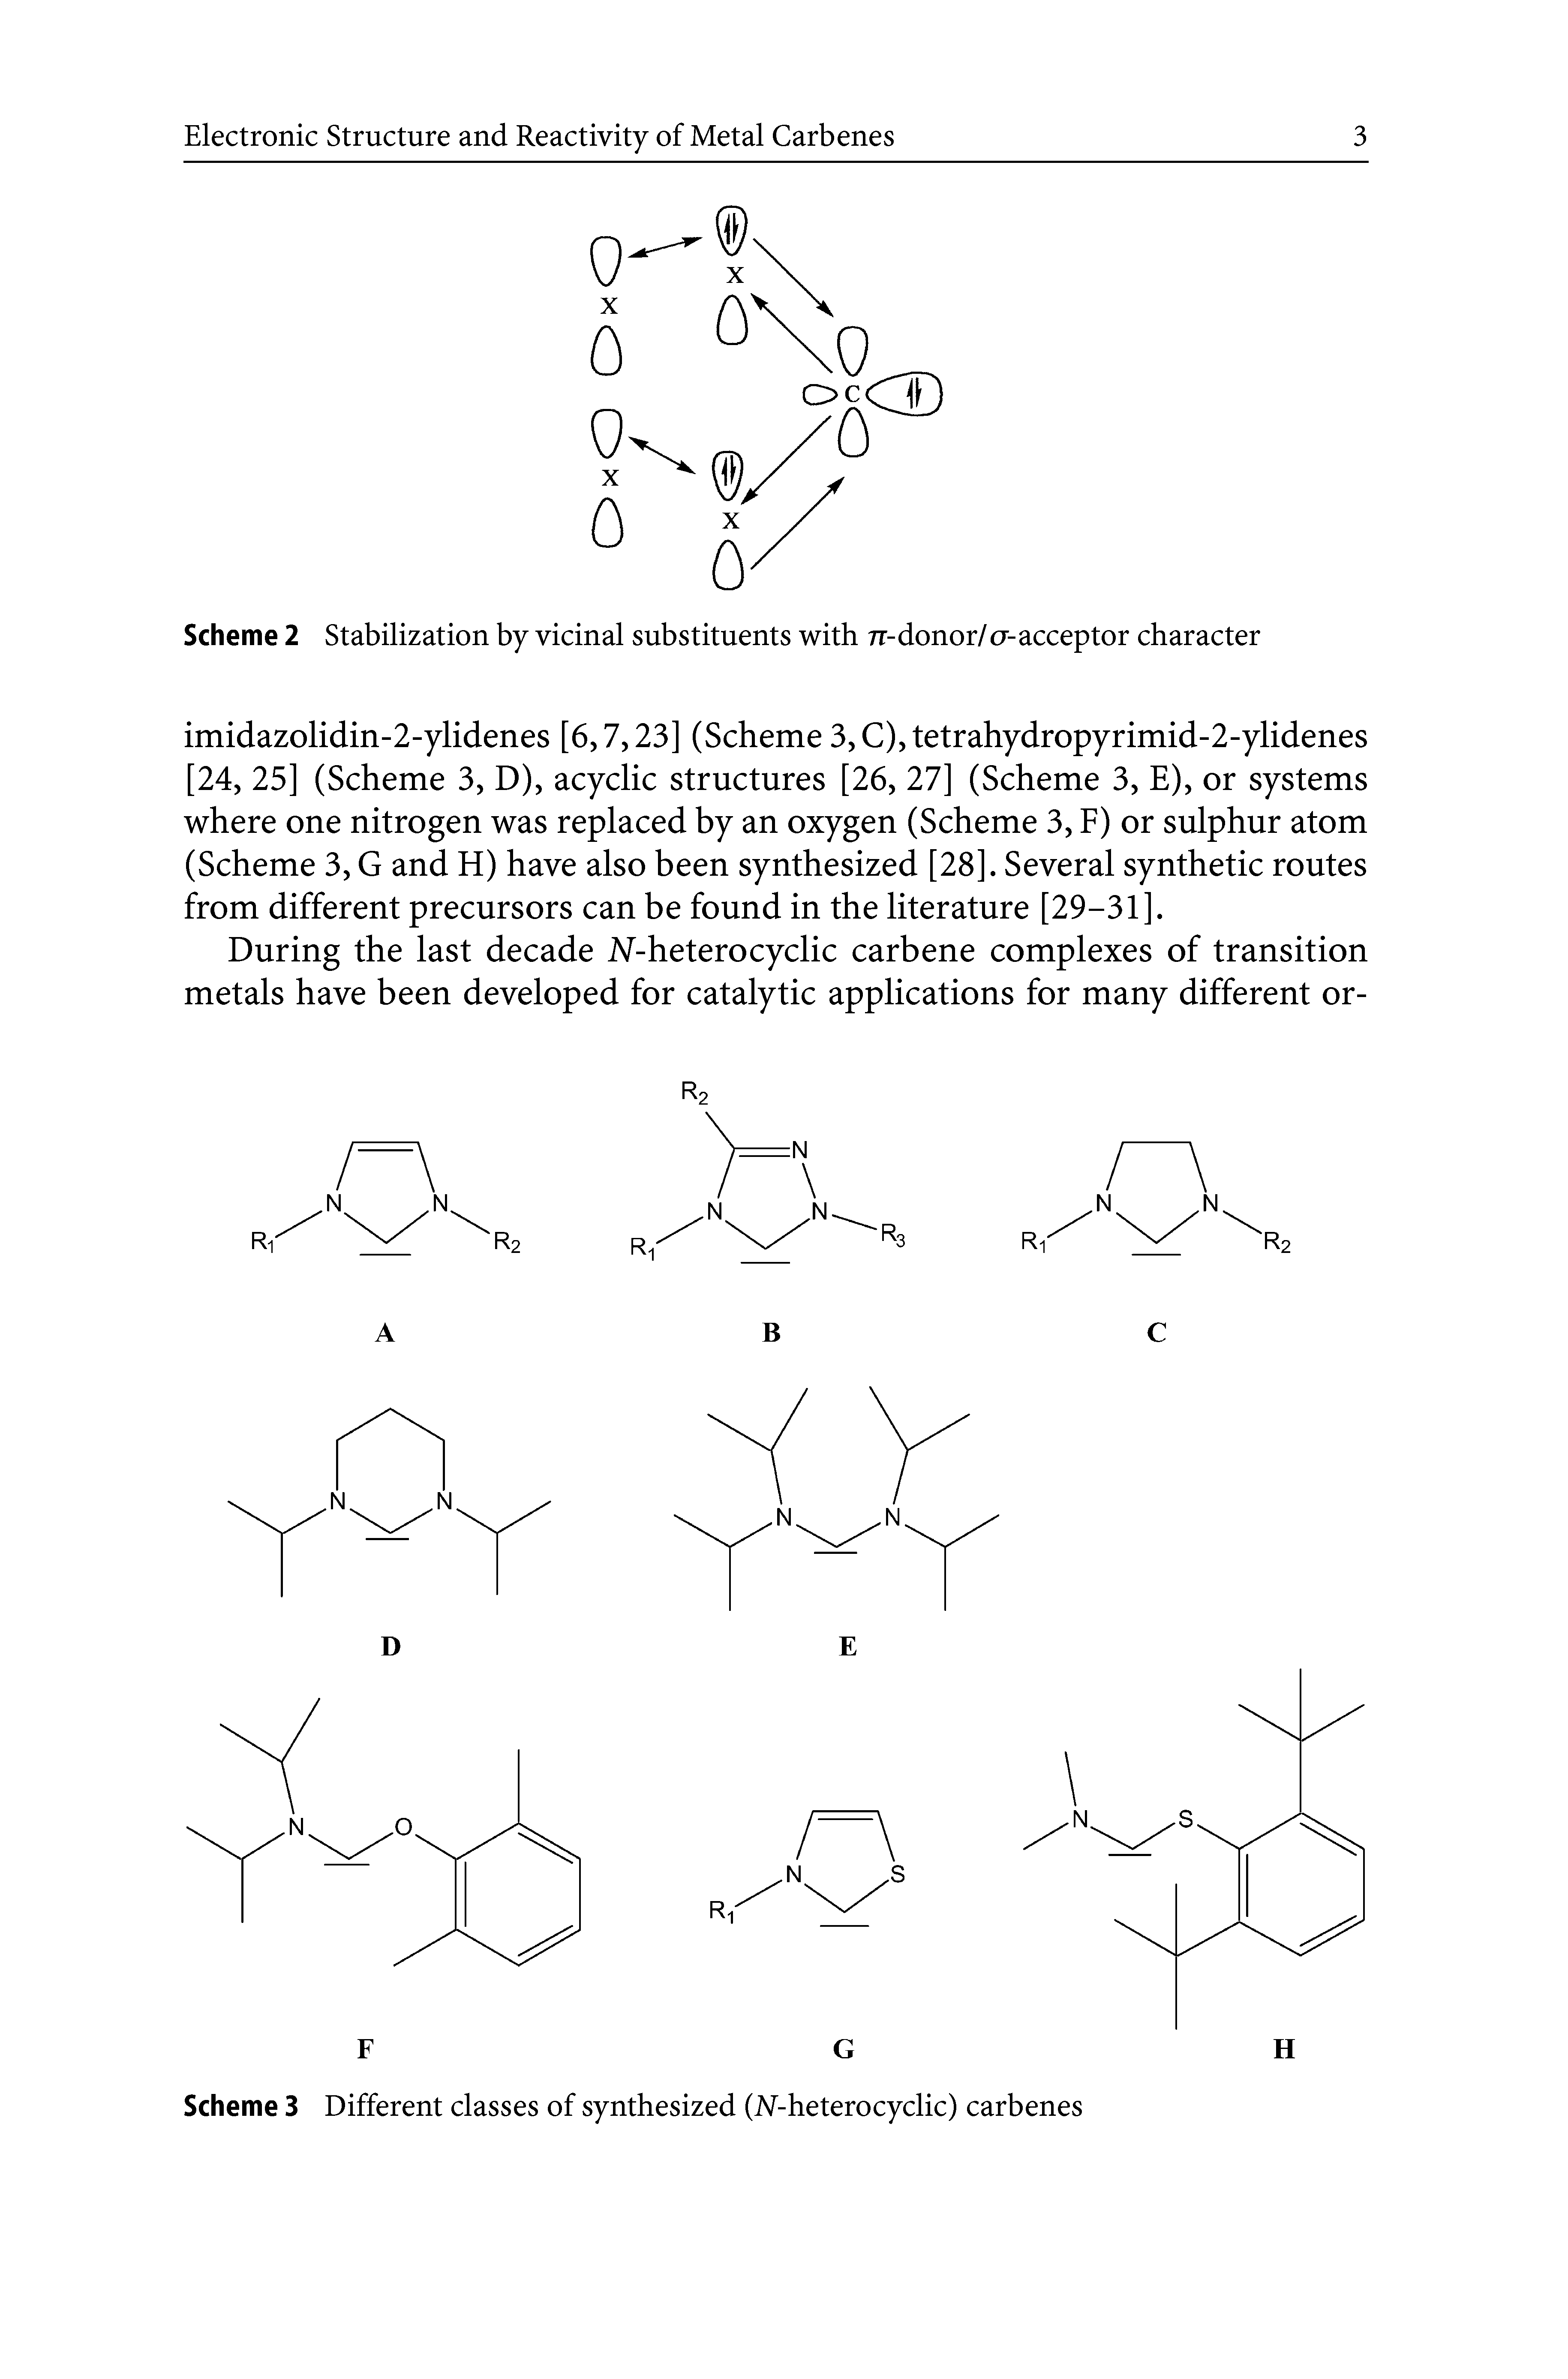 Scheme 2 Stabilization by vicinal substituents with n-donor/a-acceptor character...